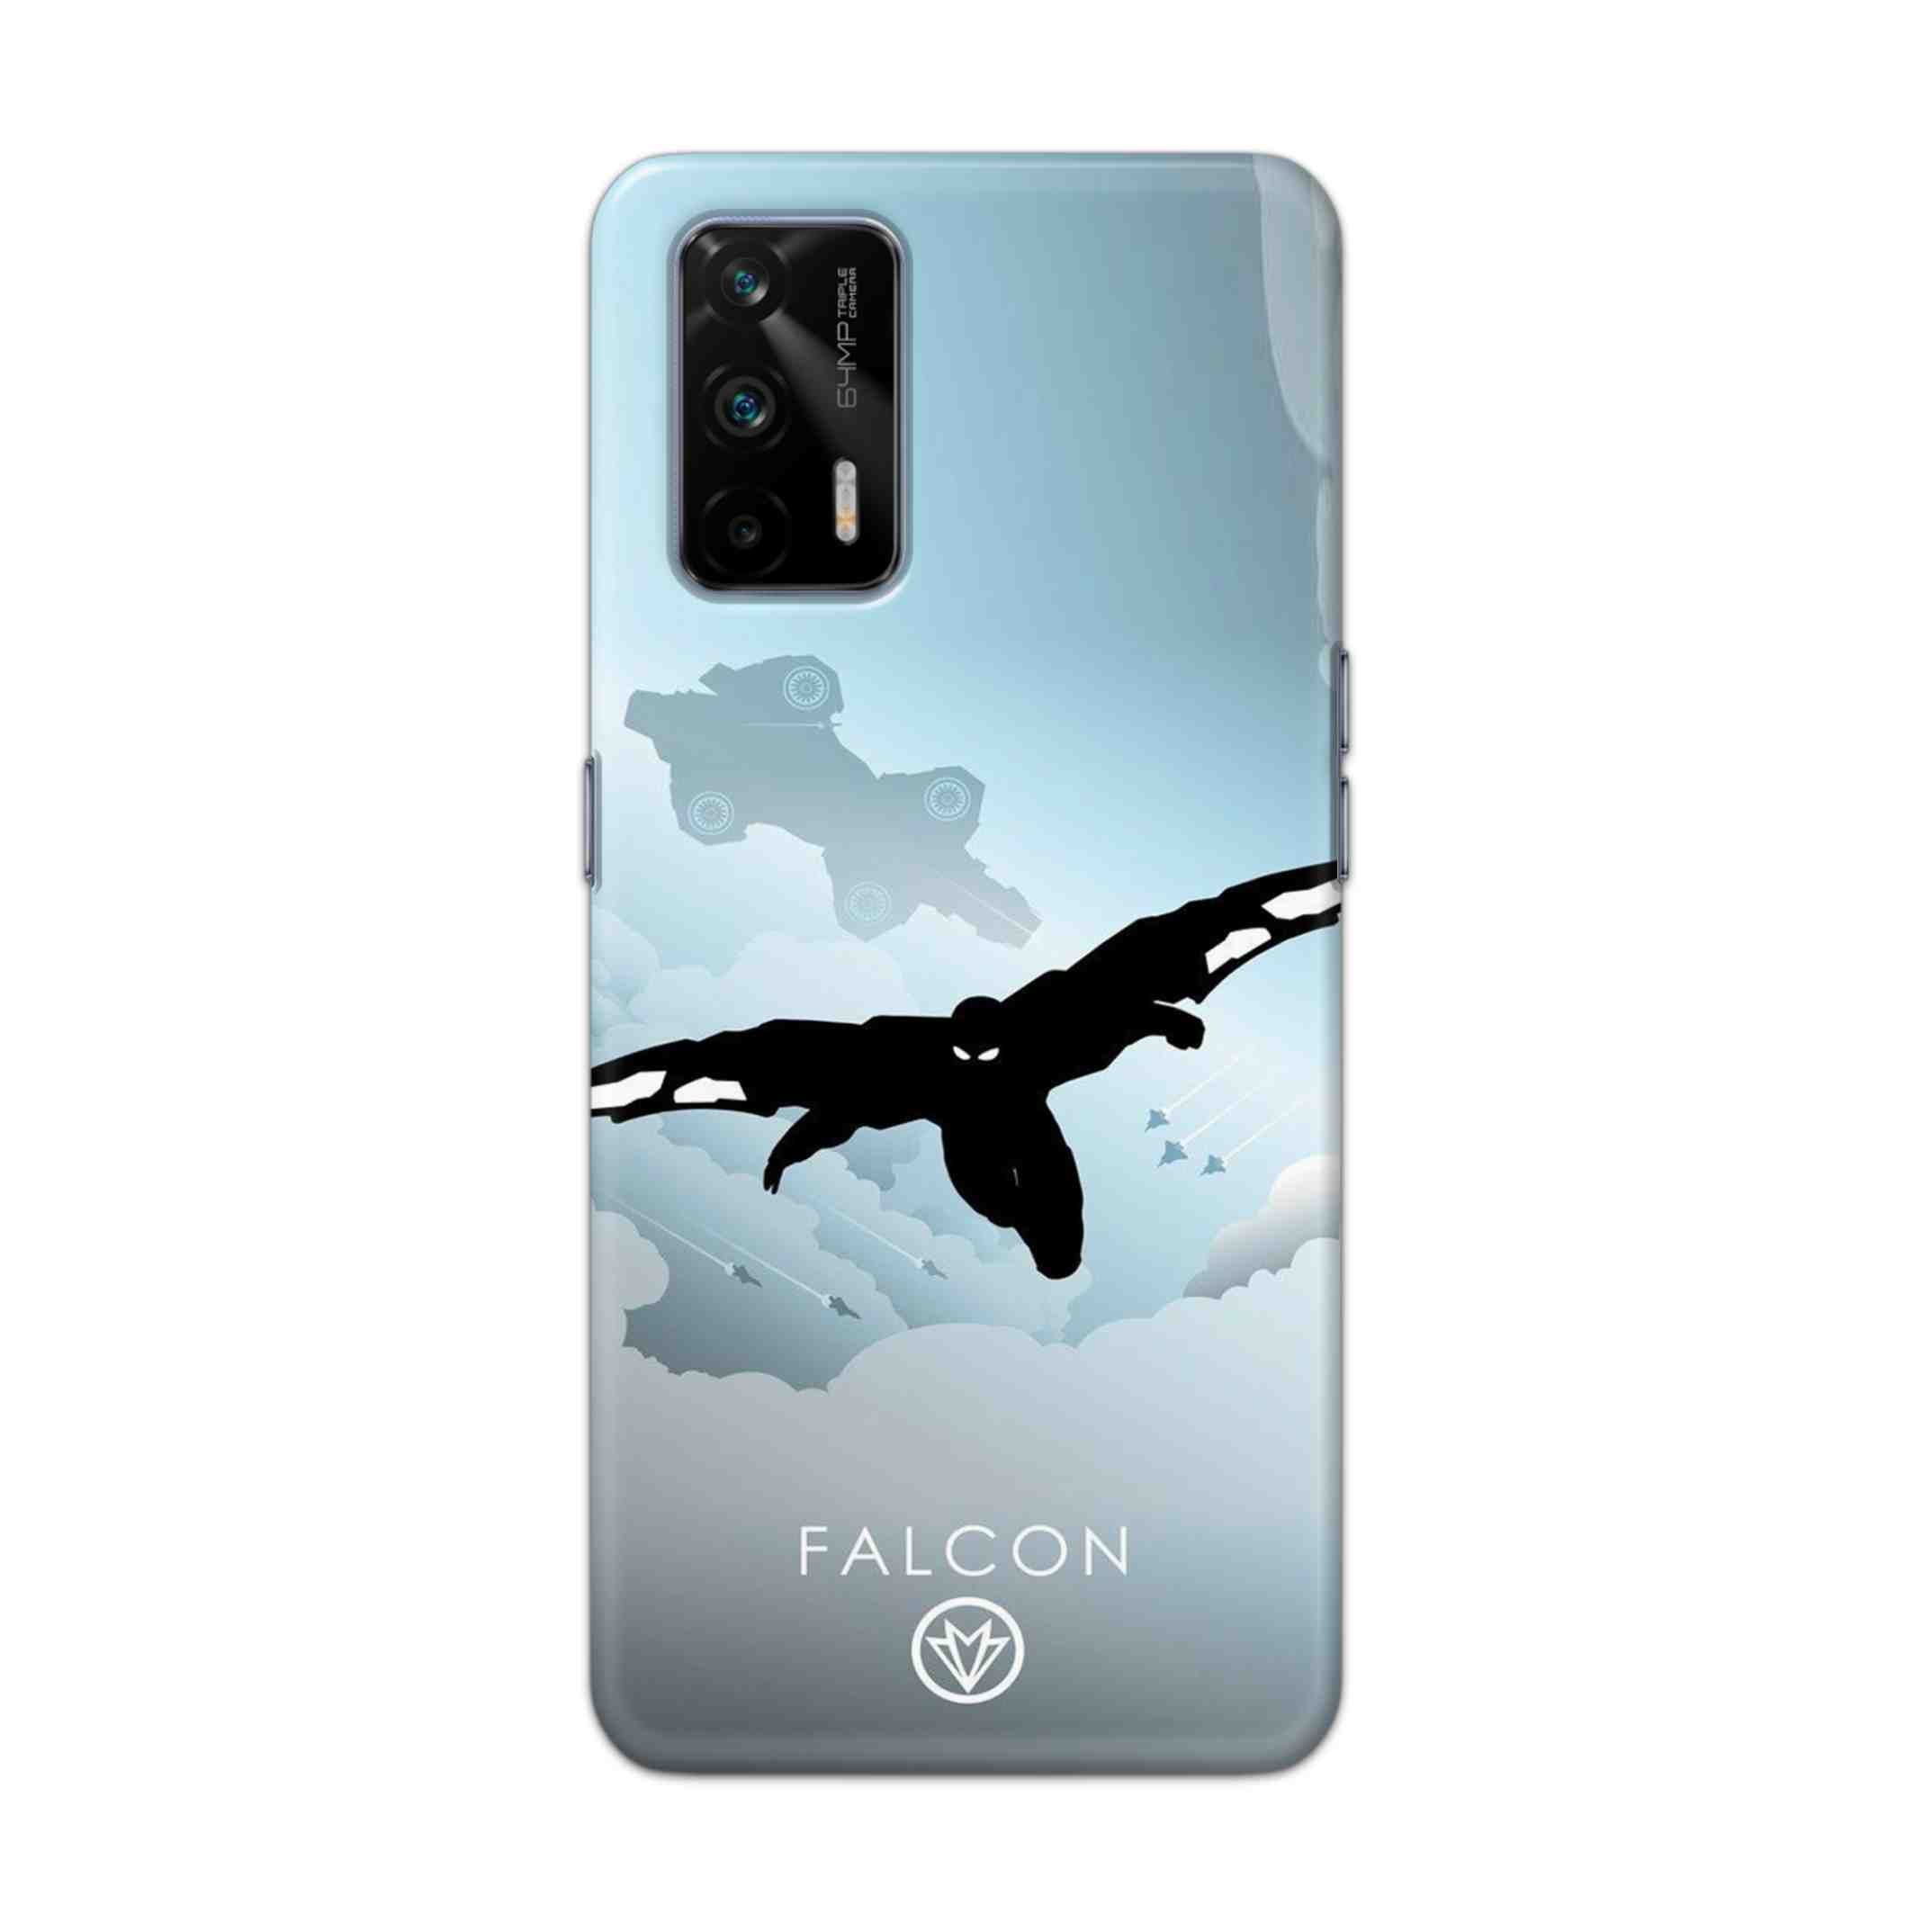 Buy Falcon Hard Back Mobile Phone Case Cover For Realme GT 5G Online